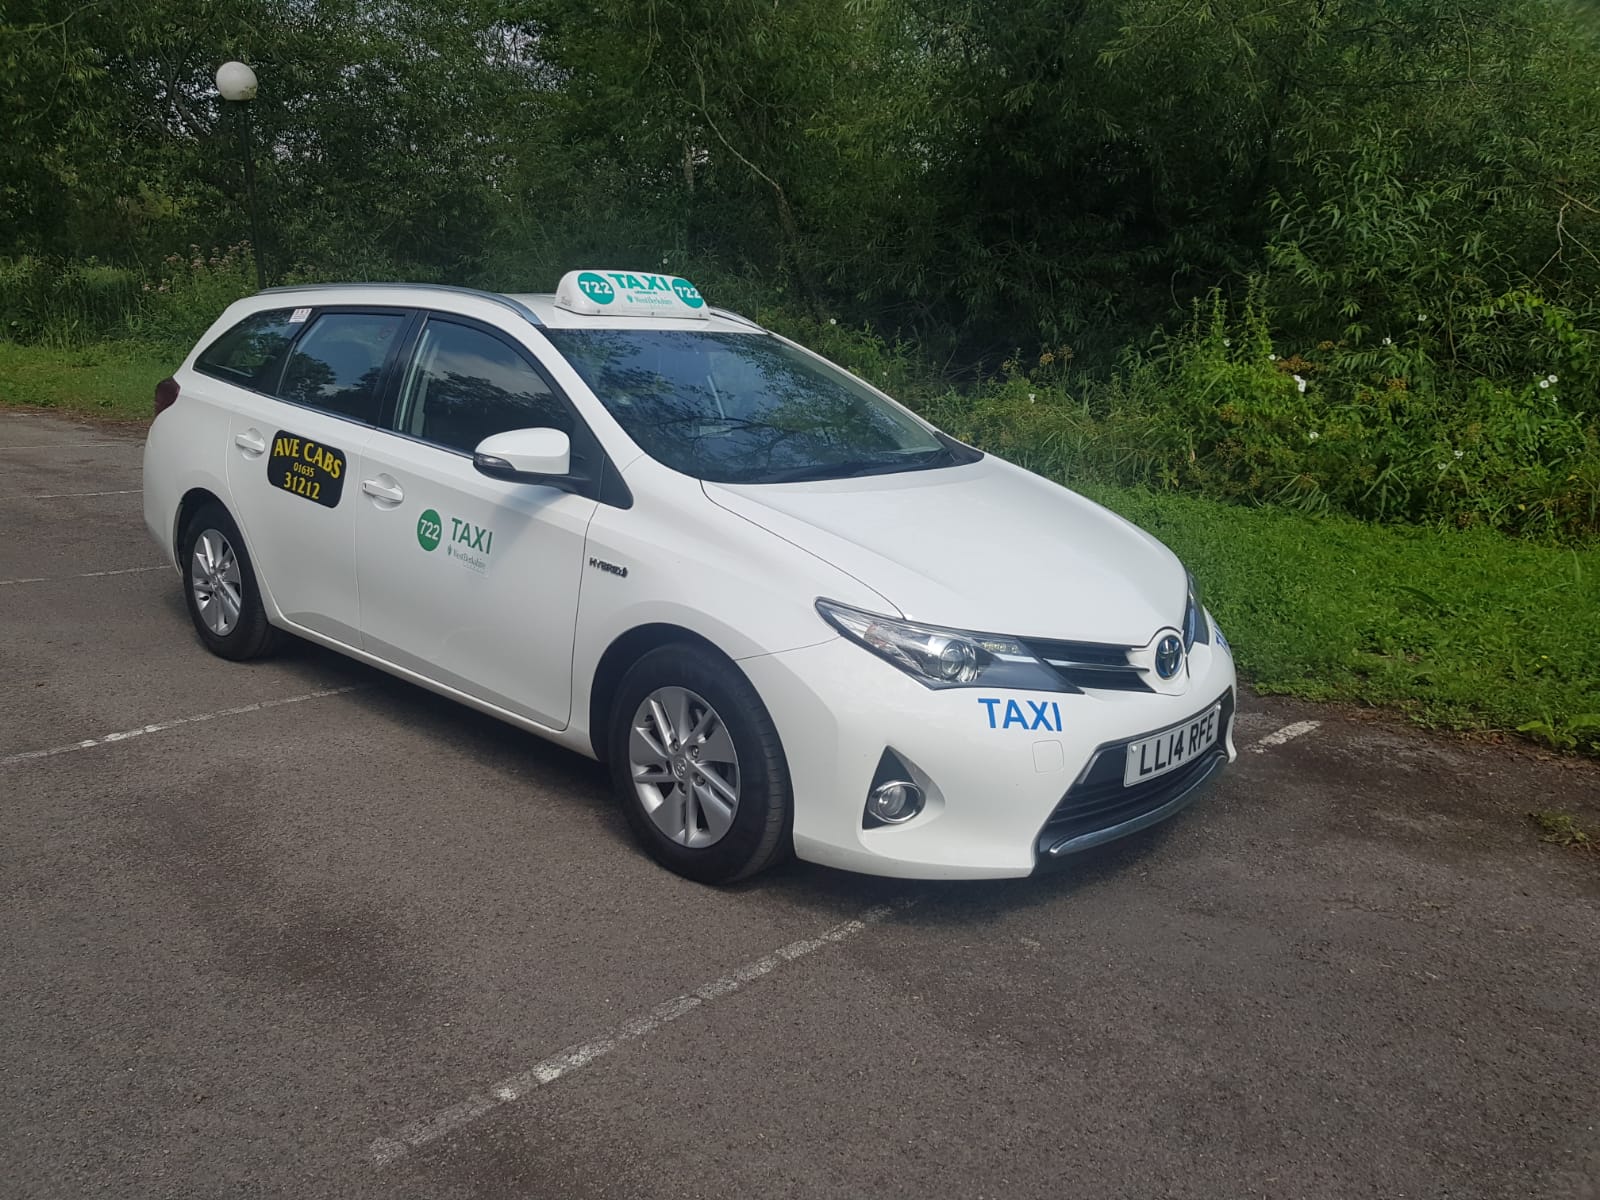 Ave cabs - Newbury & Thatcham Taxi Service – Ave Cabs